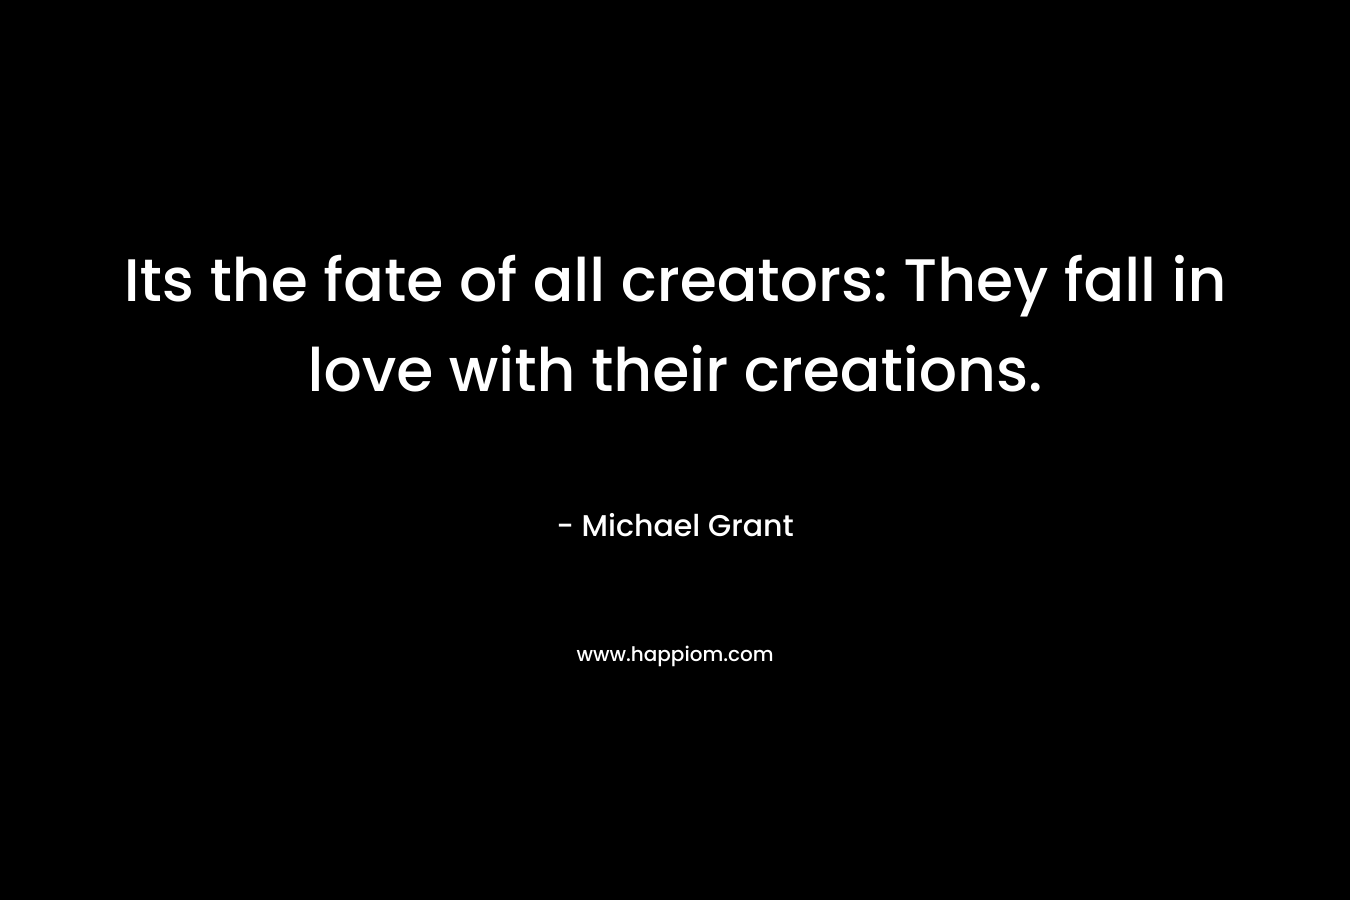 Its the fate of all creators: They fall in love with their creations.